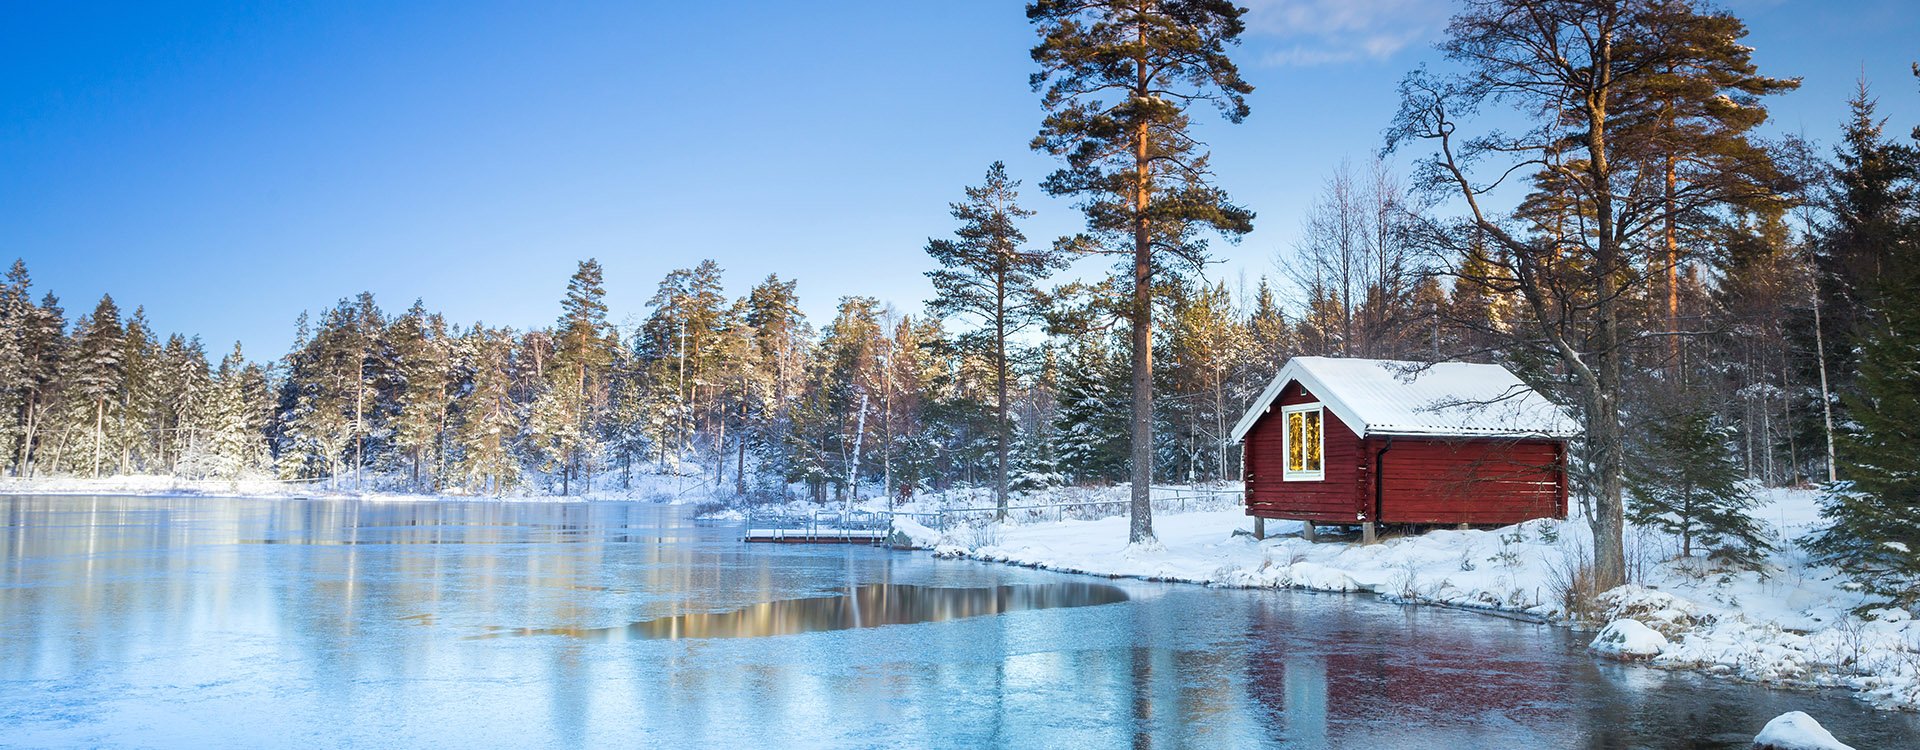 red house in Winter, Sweden Lapland